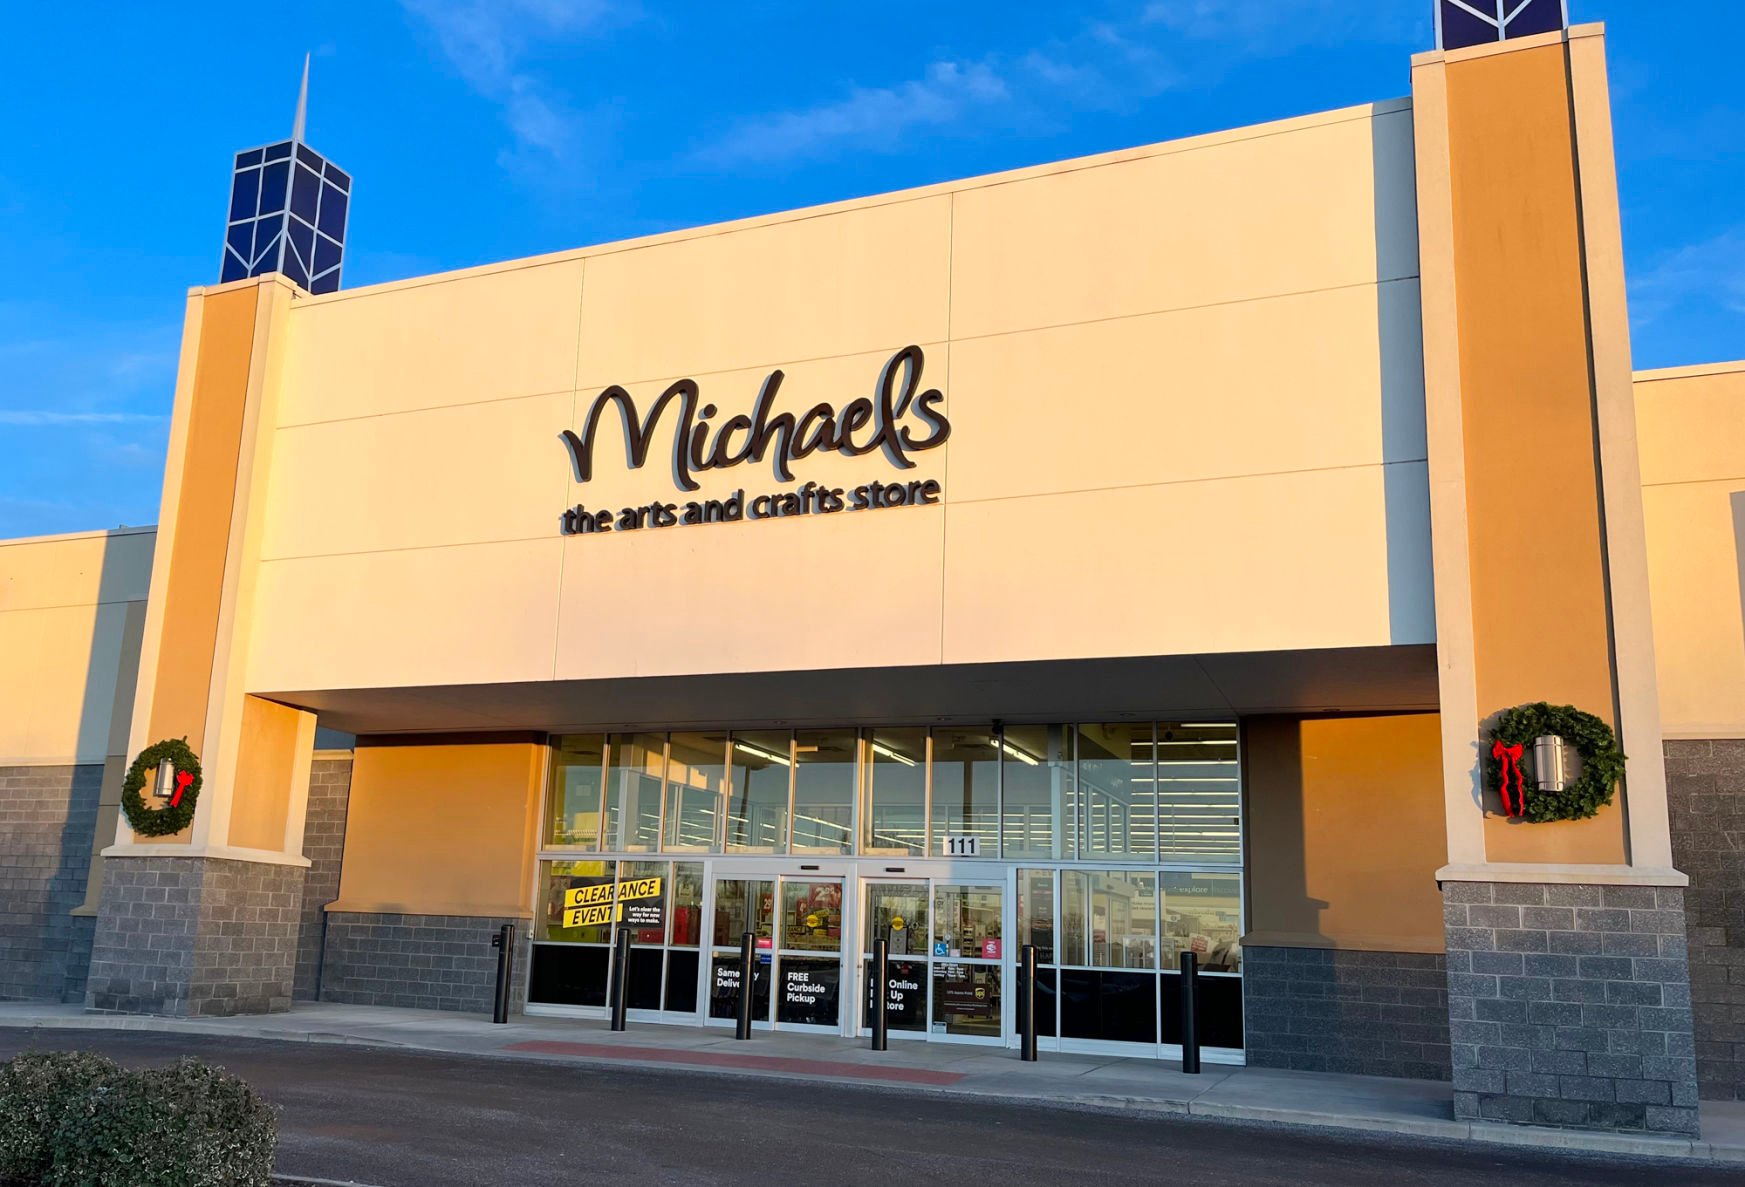 After acquisition, still 'business as usual' for Michaels, News